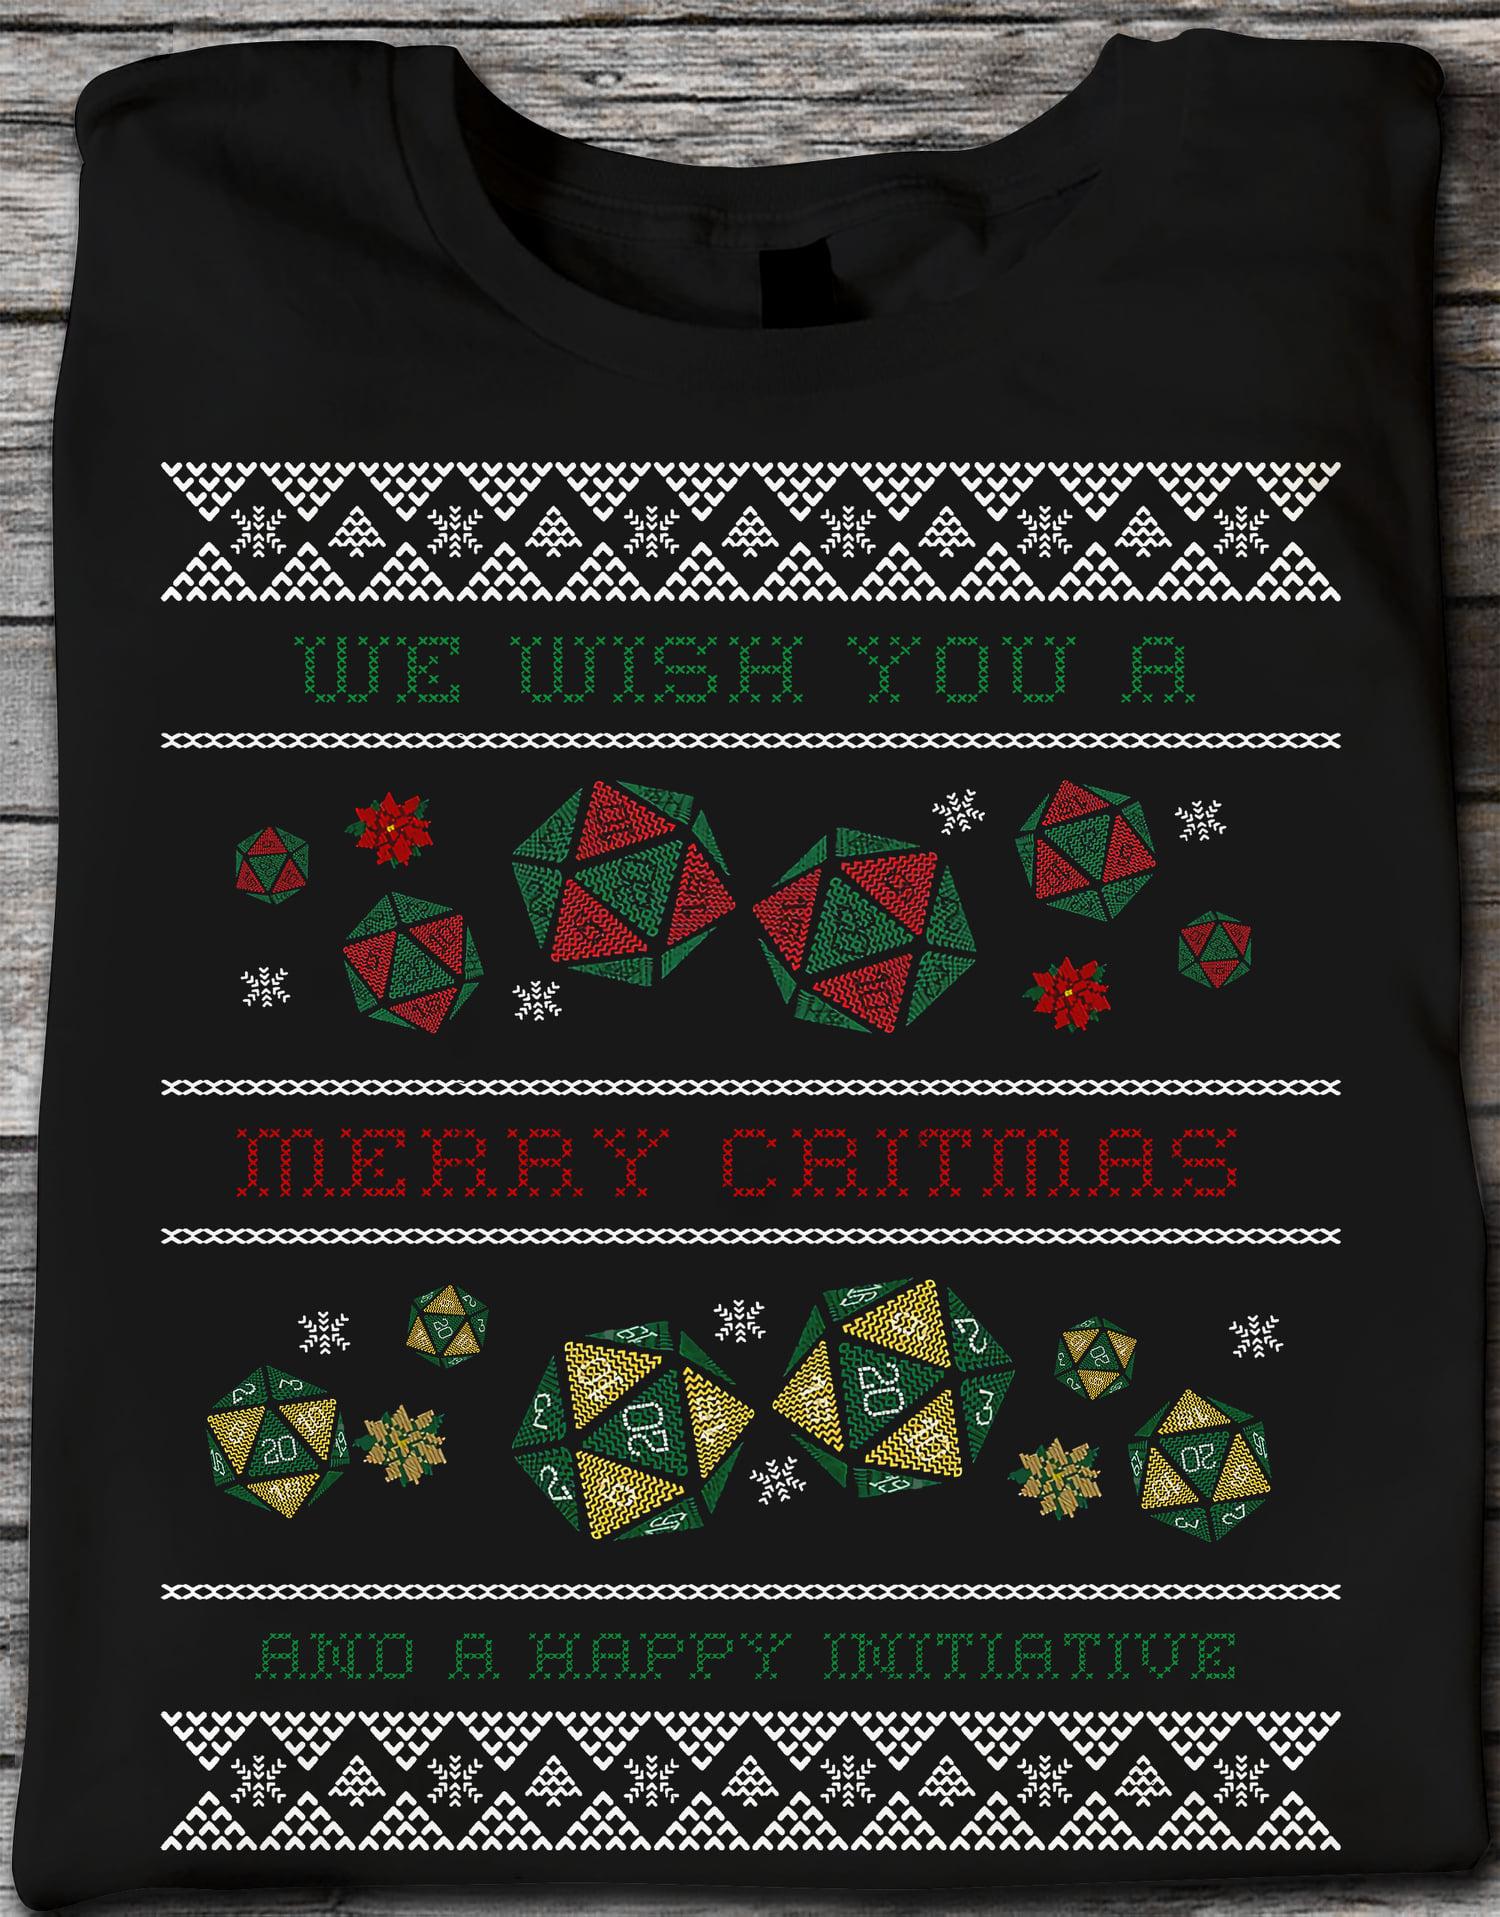 Christmas Dice, Dungeon And Dragon, Ugly Sweater - We wish you a merry christmas and a happy initiative